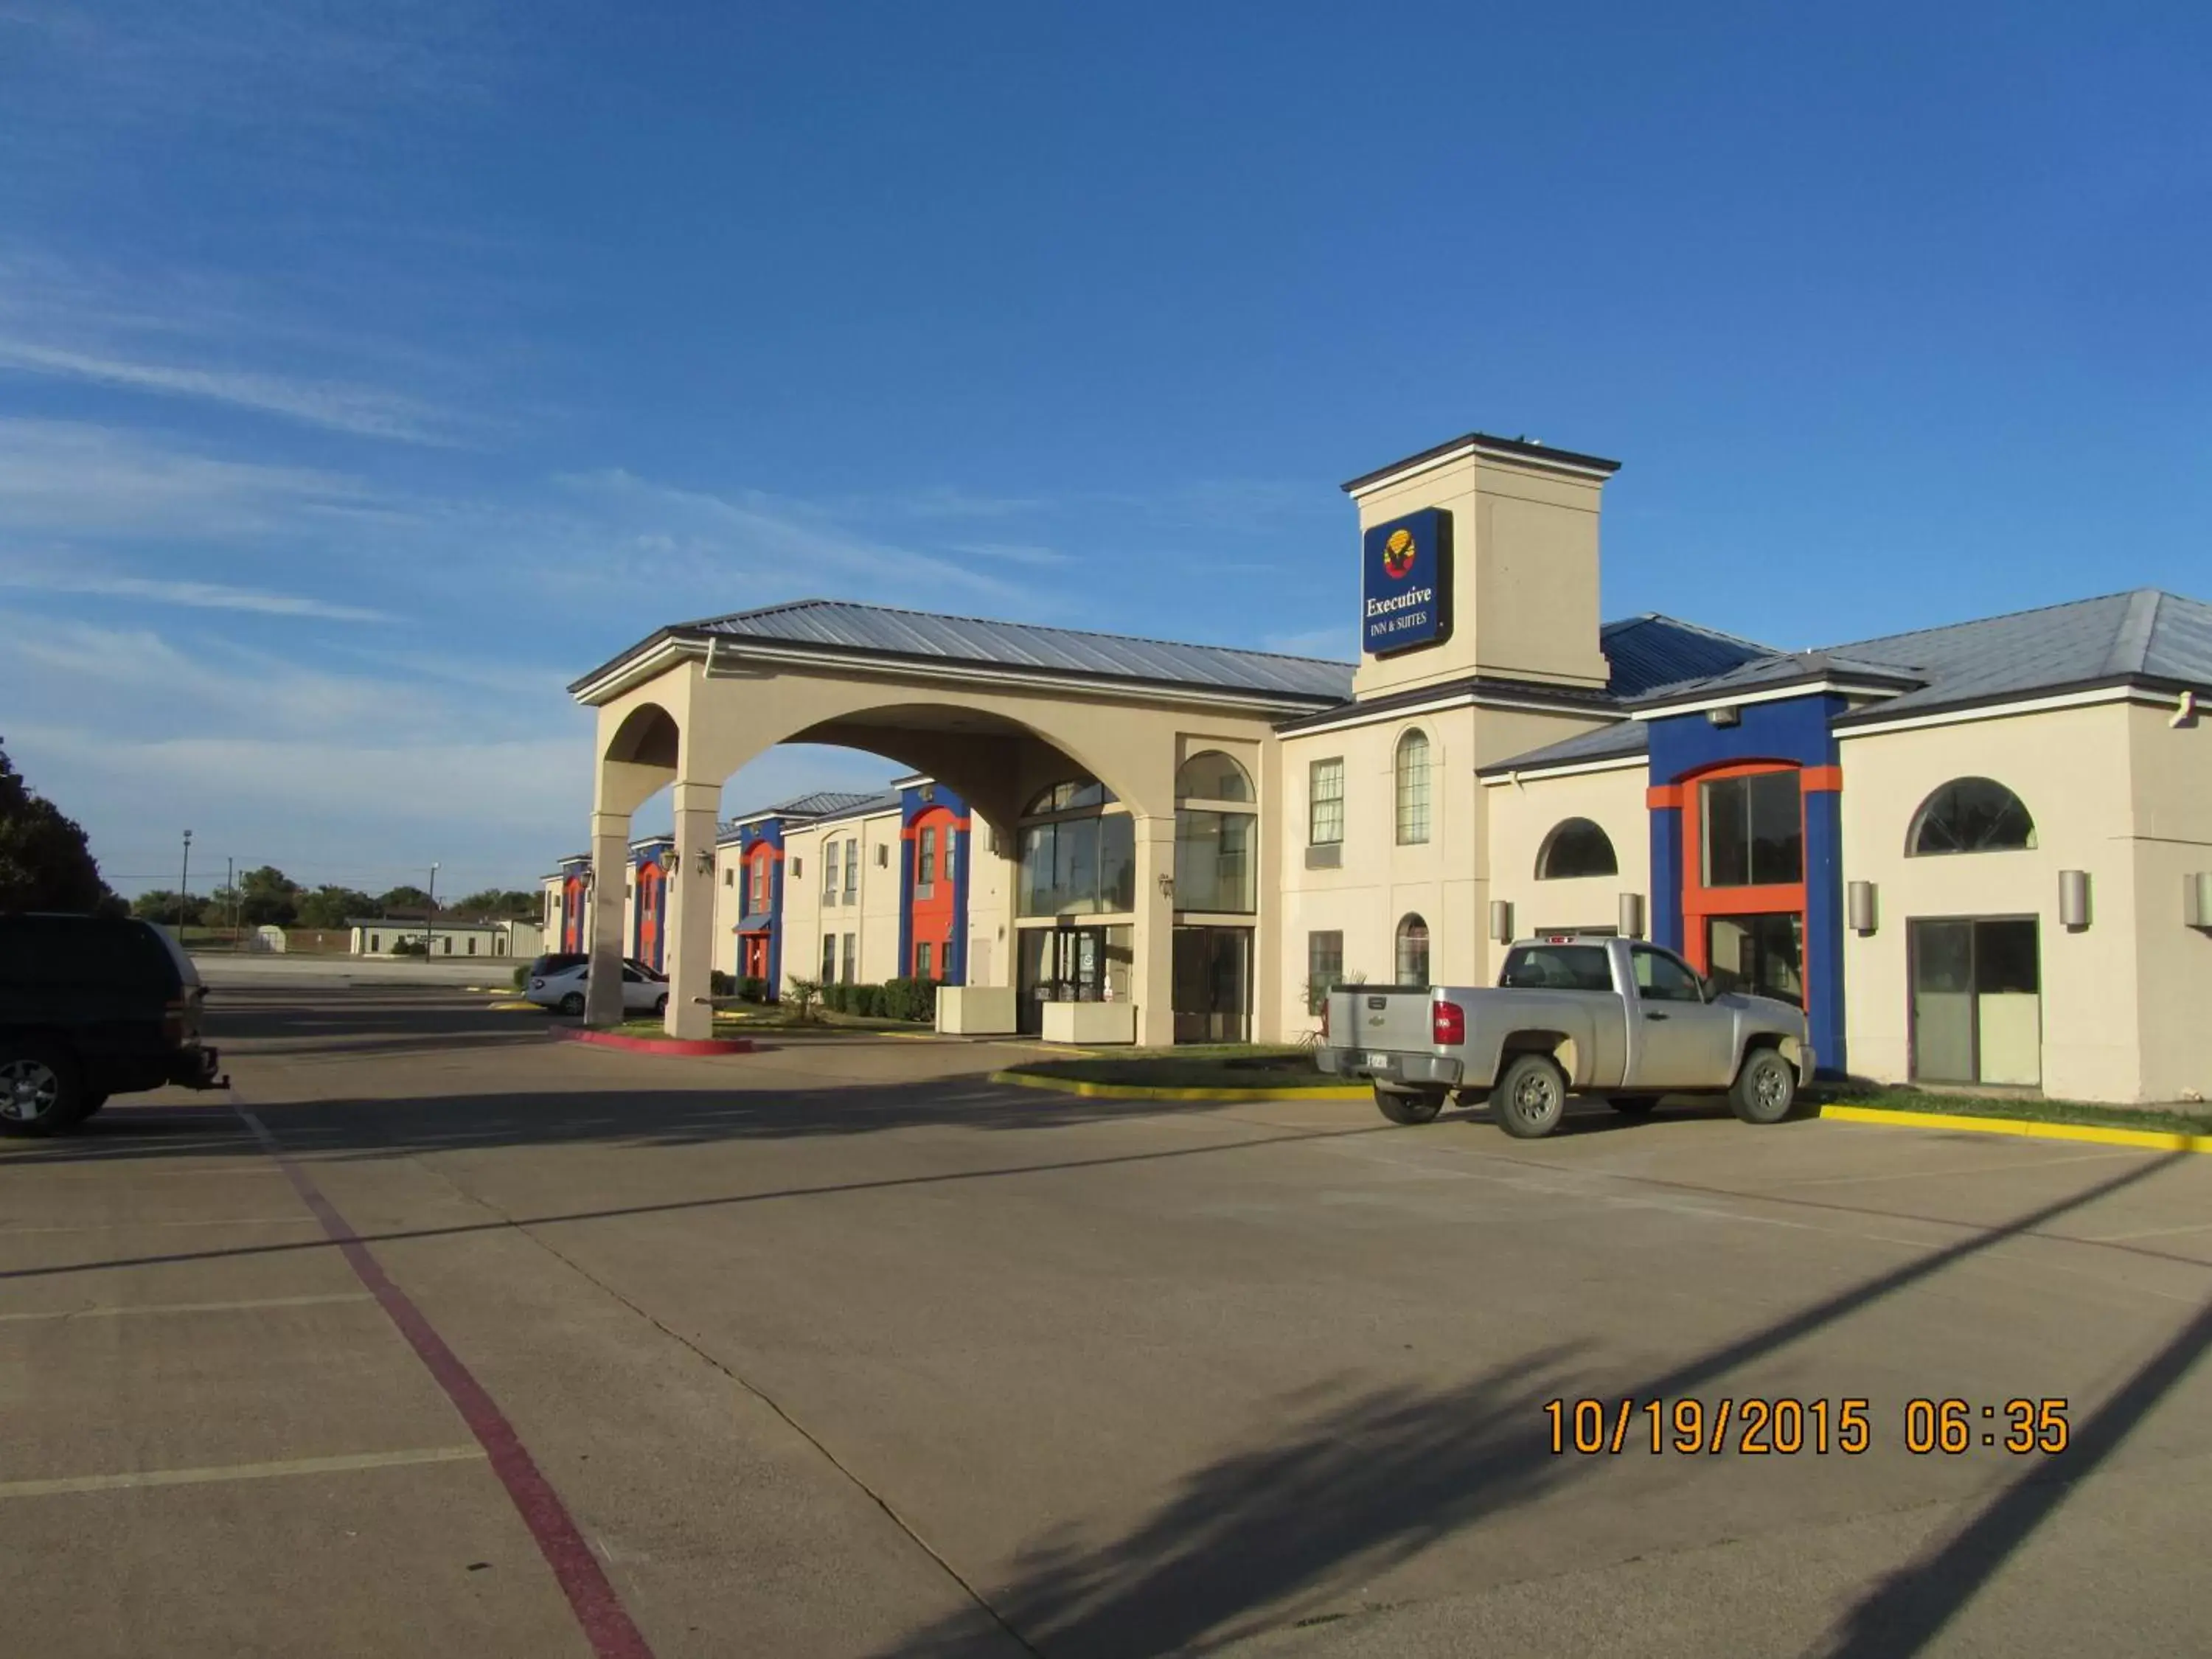 Street view, Property Building in Executive Inn and Suites Wichita Falls